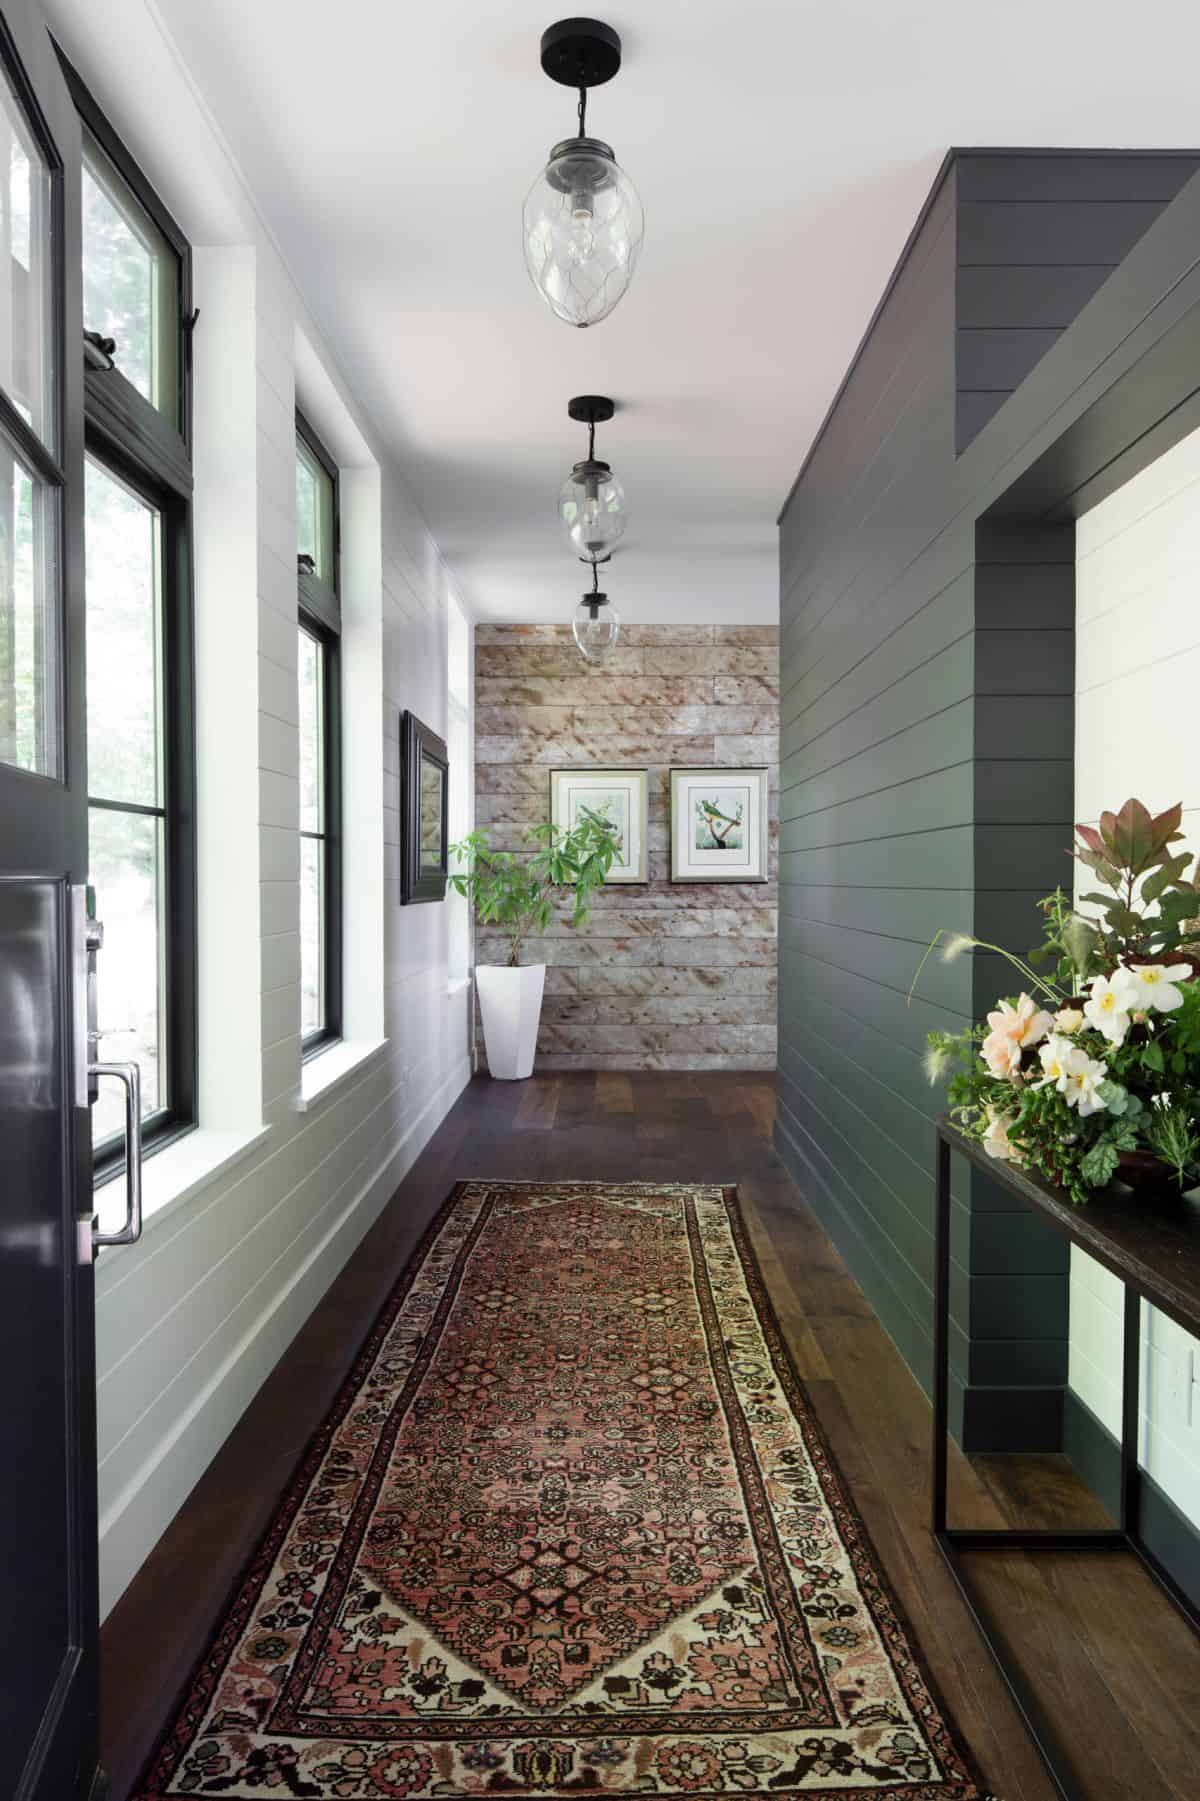 A hallway with an accent wall paint design idea plants and windows